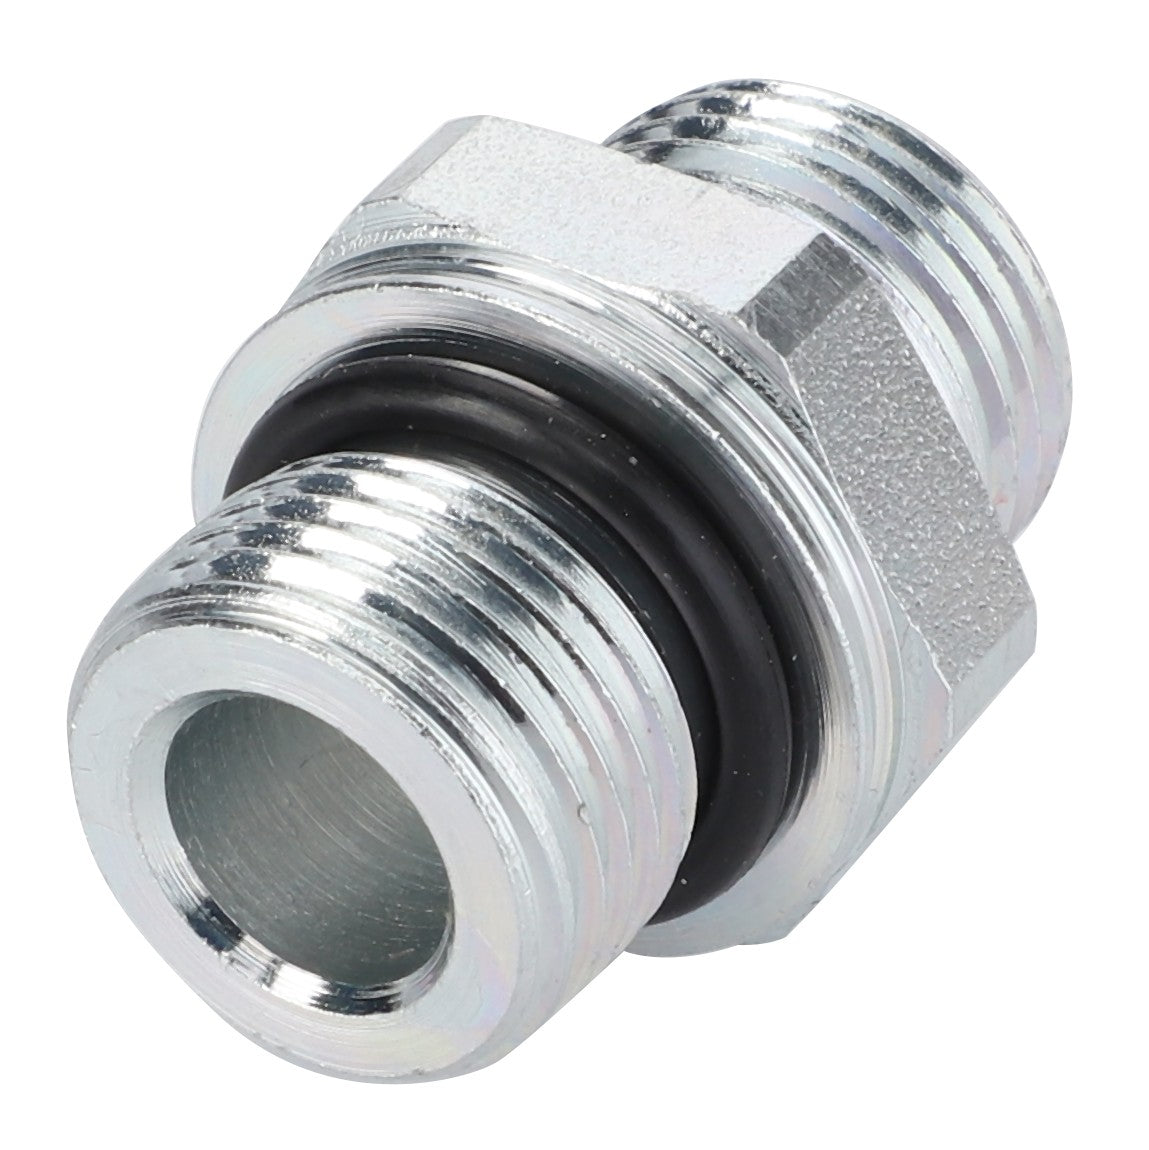 AGCO | Connector Fitting - Acw4002610 - Farming Parts